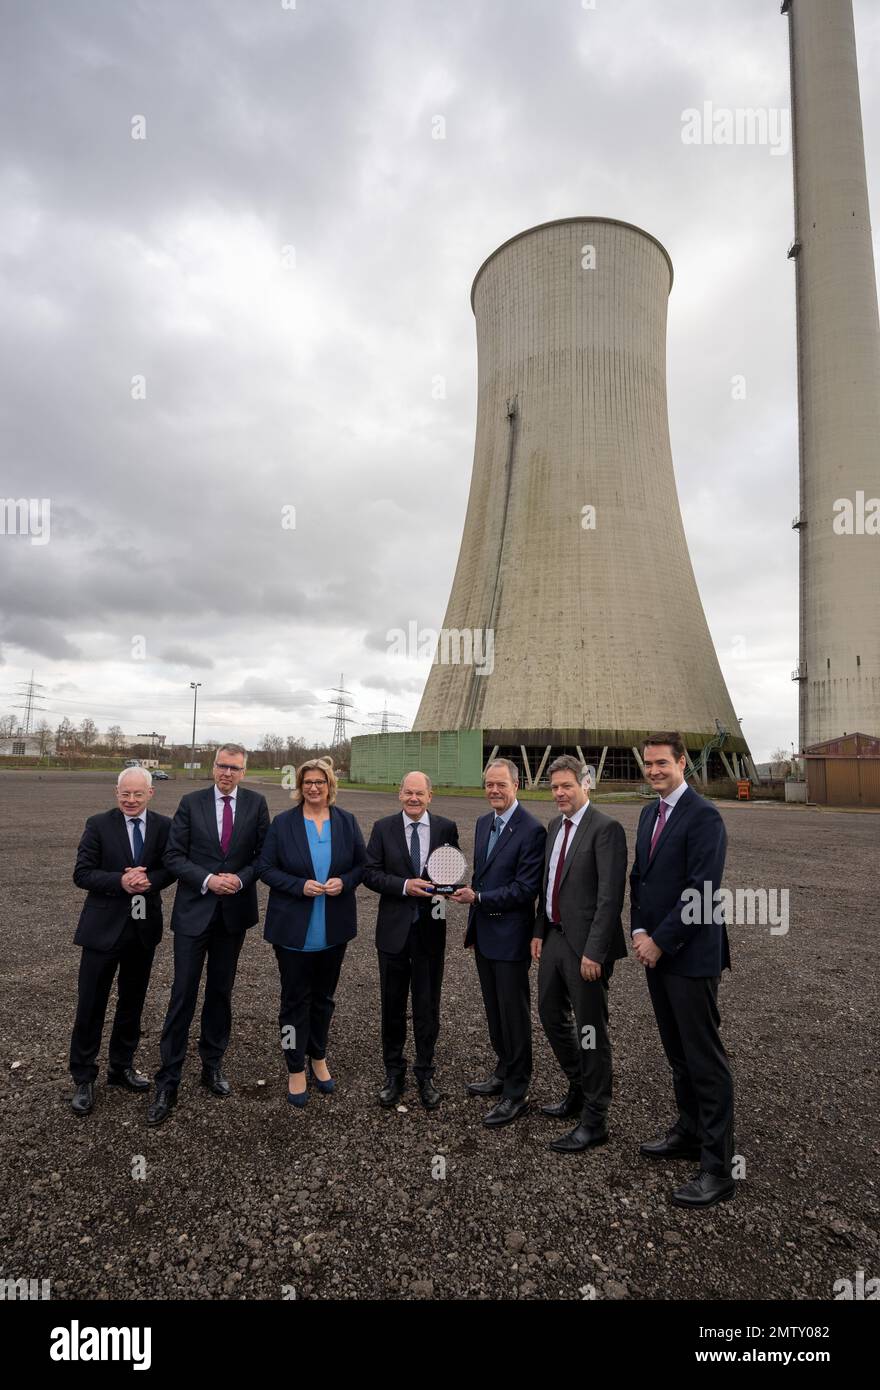 01 February 2023, Saarland, Ensdorf: Jürgen Barke (l-r, SPD, Saarland Minister of Economics), Holger Klein, CEO ZF Group, Anke Rehlinger (SPD), Minister President of Saarland, German Chancellor Olaf Scholz (SPD) and Gregg Lowe, CEO Wolfspeed, Robert Habeck (Bündnis 90/Die Grünen), Federal Minister of Economics and Climate Protection, and Stephan von Schuckmann, Member of the Board of Management ZF Group, stand in front of a decommissioned coal-fired power plant. The U.S. company Wolfspeed wants to build a modern chip factory in Saarland. The supplier ZF wants to support the new construction wi Stock Photo